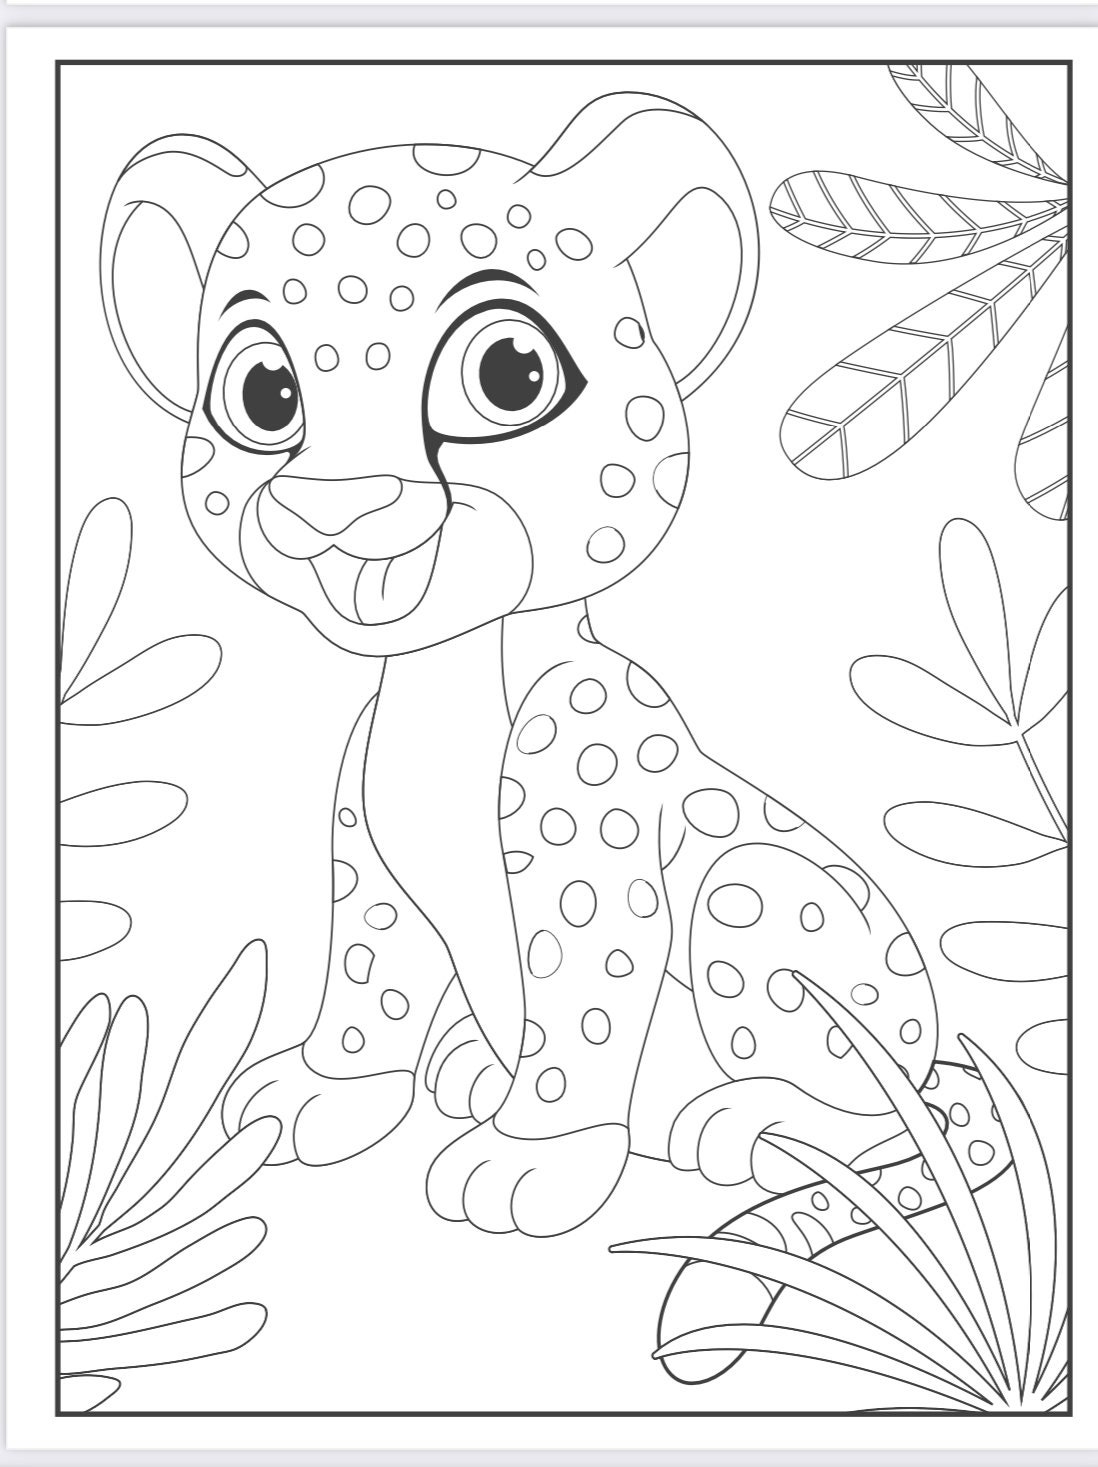 Cheapest 2000 Coloring Pages - Etsy